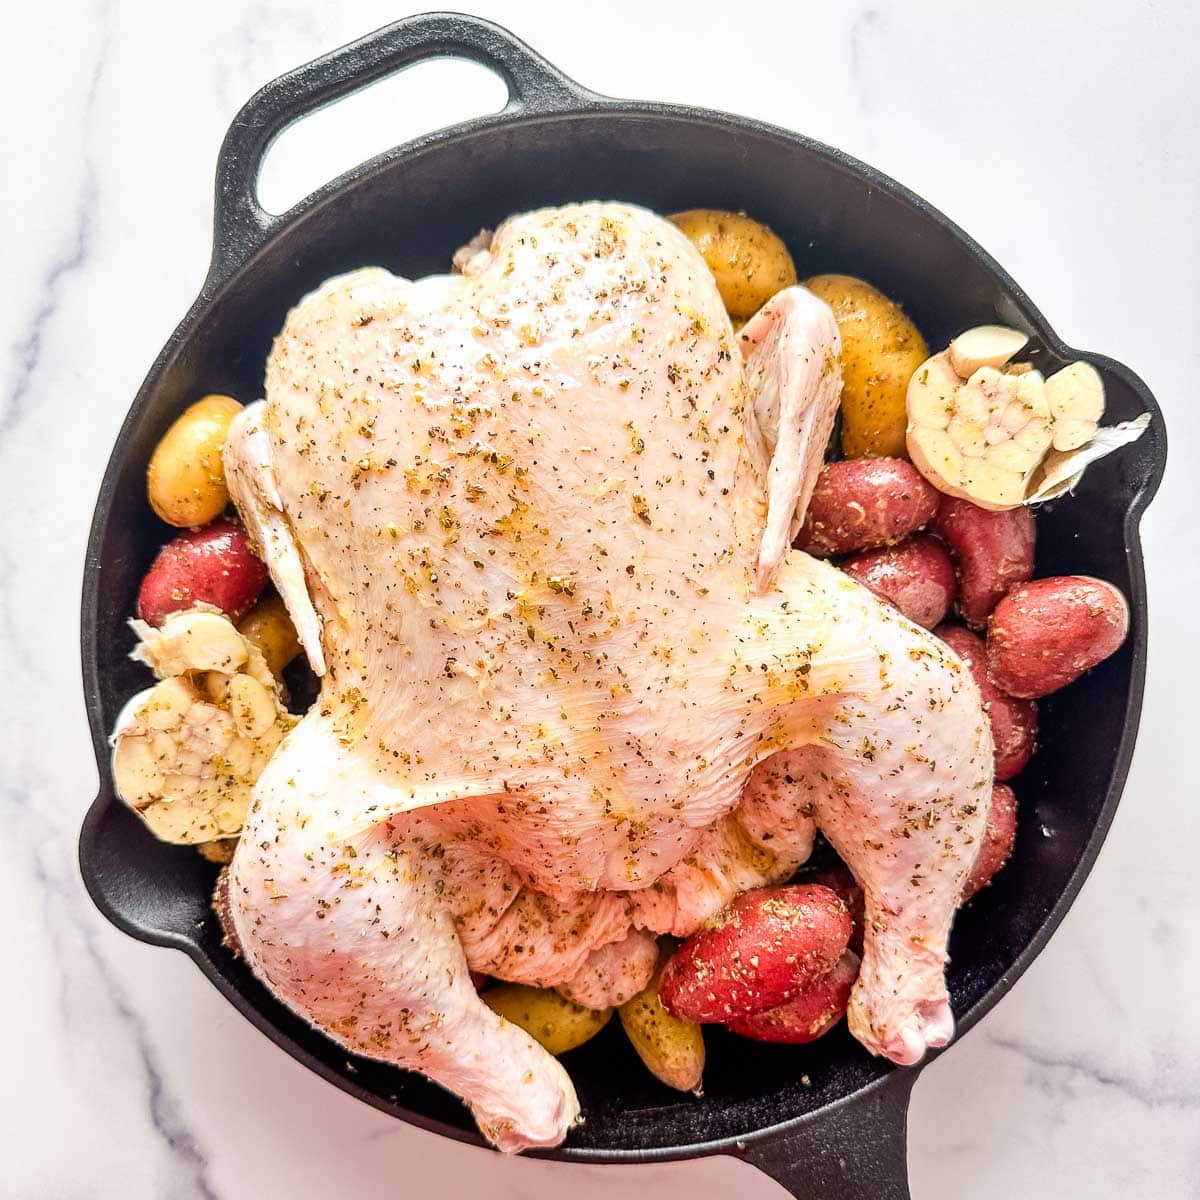 A chicken and potatoes in a cast iron skillet.